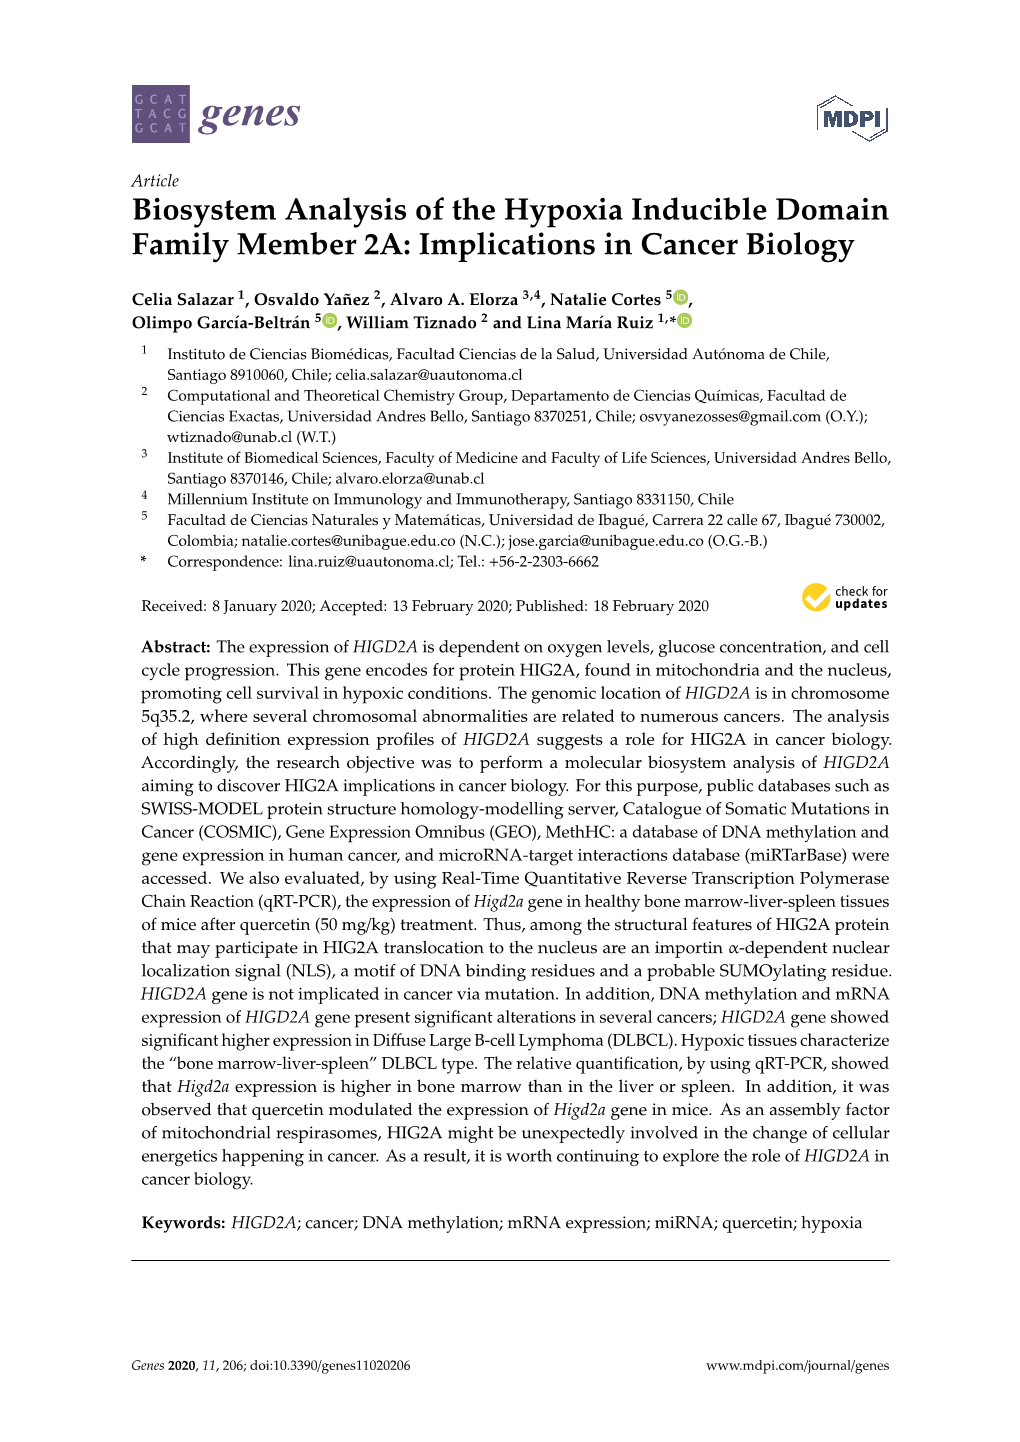 Biosystem Analysis of the Hypoxia Inducible Domain Family Member 2A: Implications in Cancer Biology